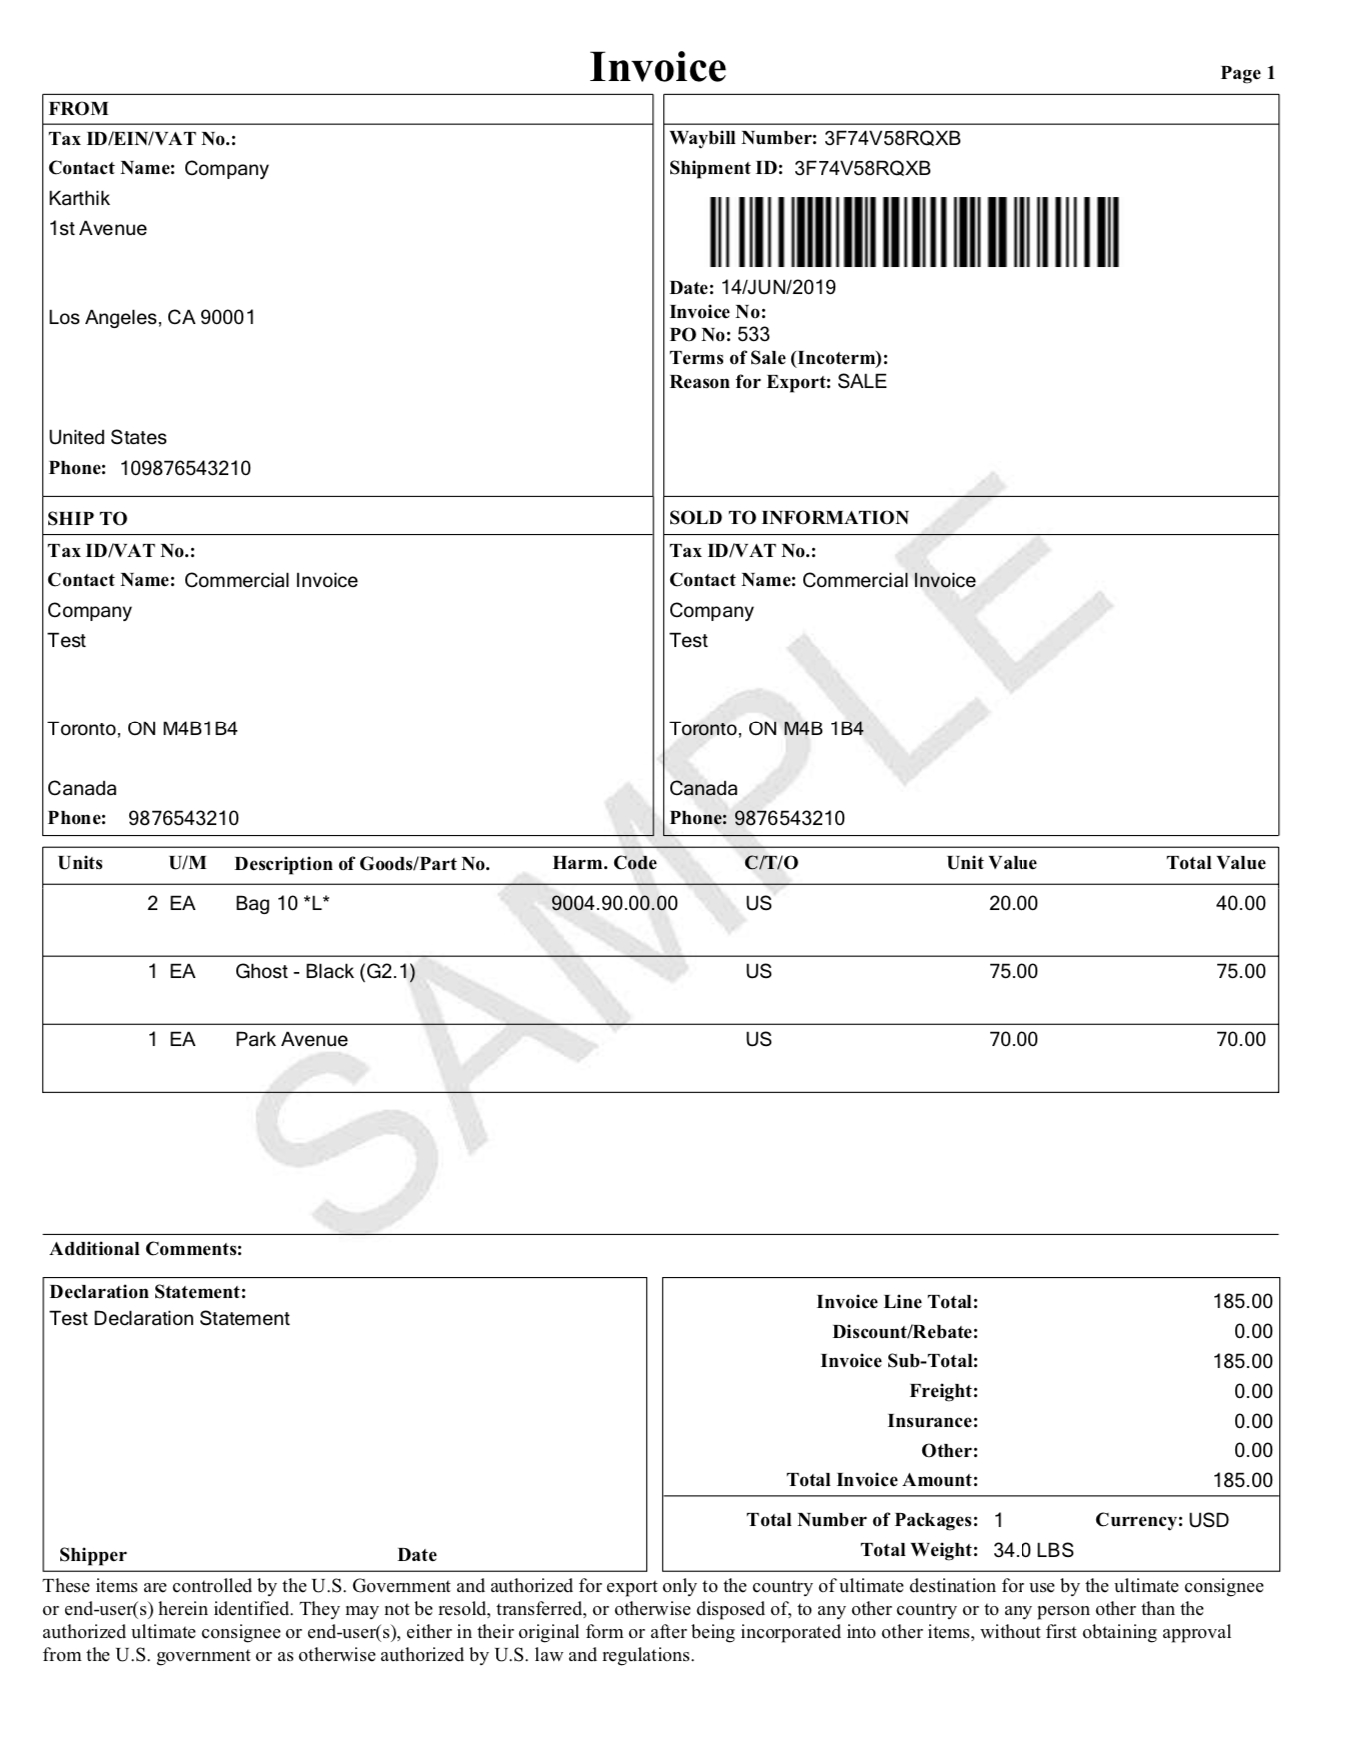 ups-international-commercial-invoice-template-invoice-template-ideas